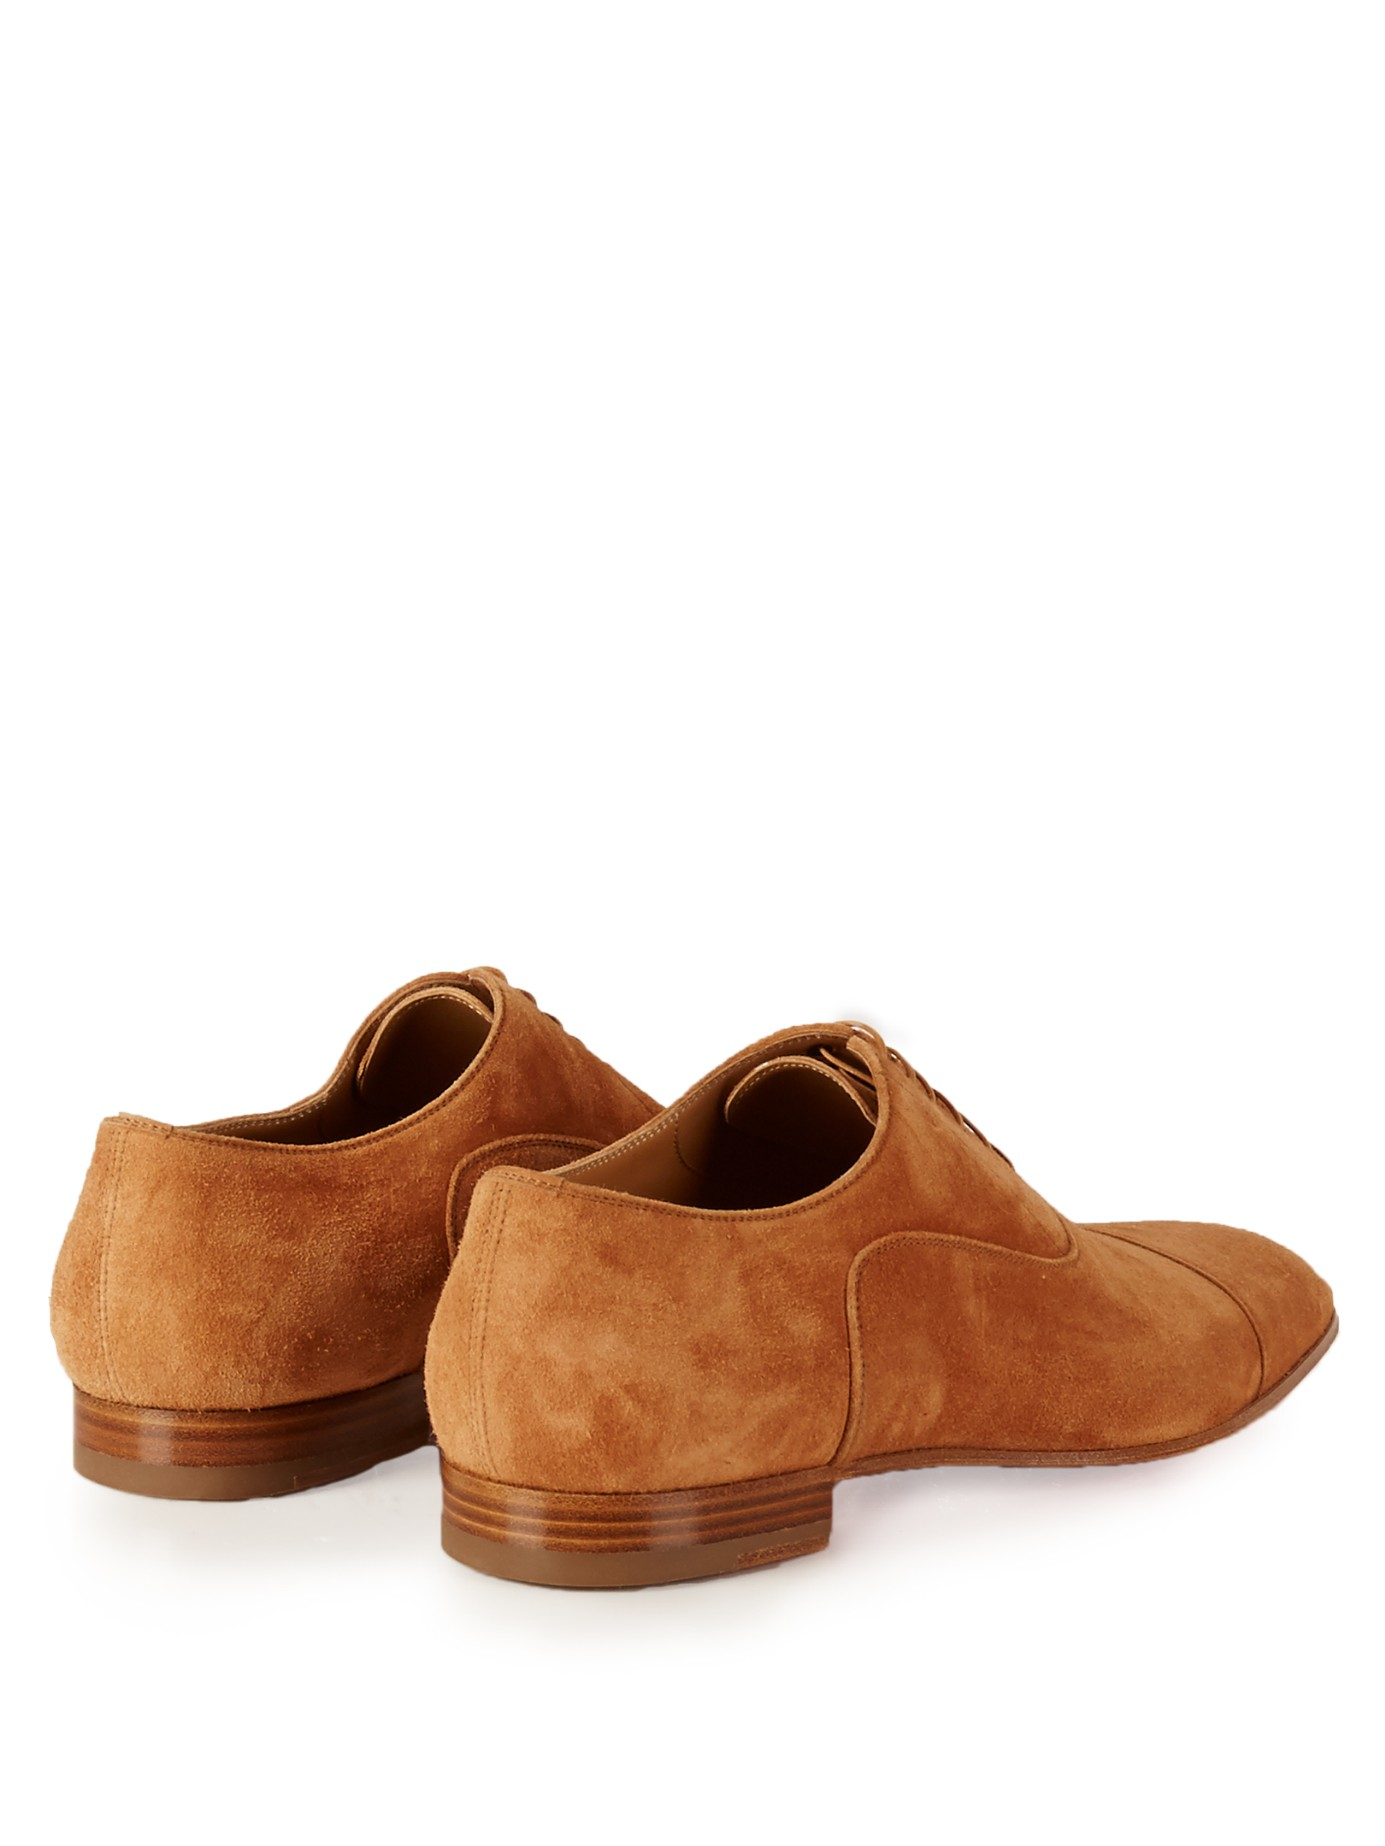 Christian louboutin Greggo Suede Oxford Shoes in Brown for Men | Lyst